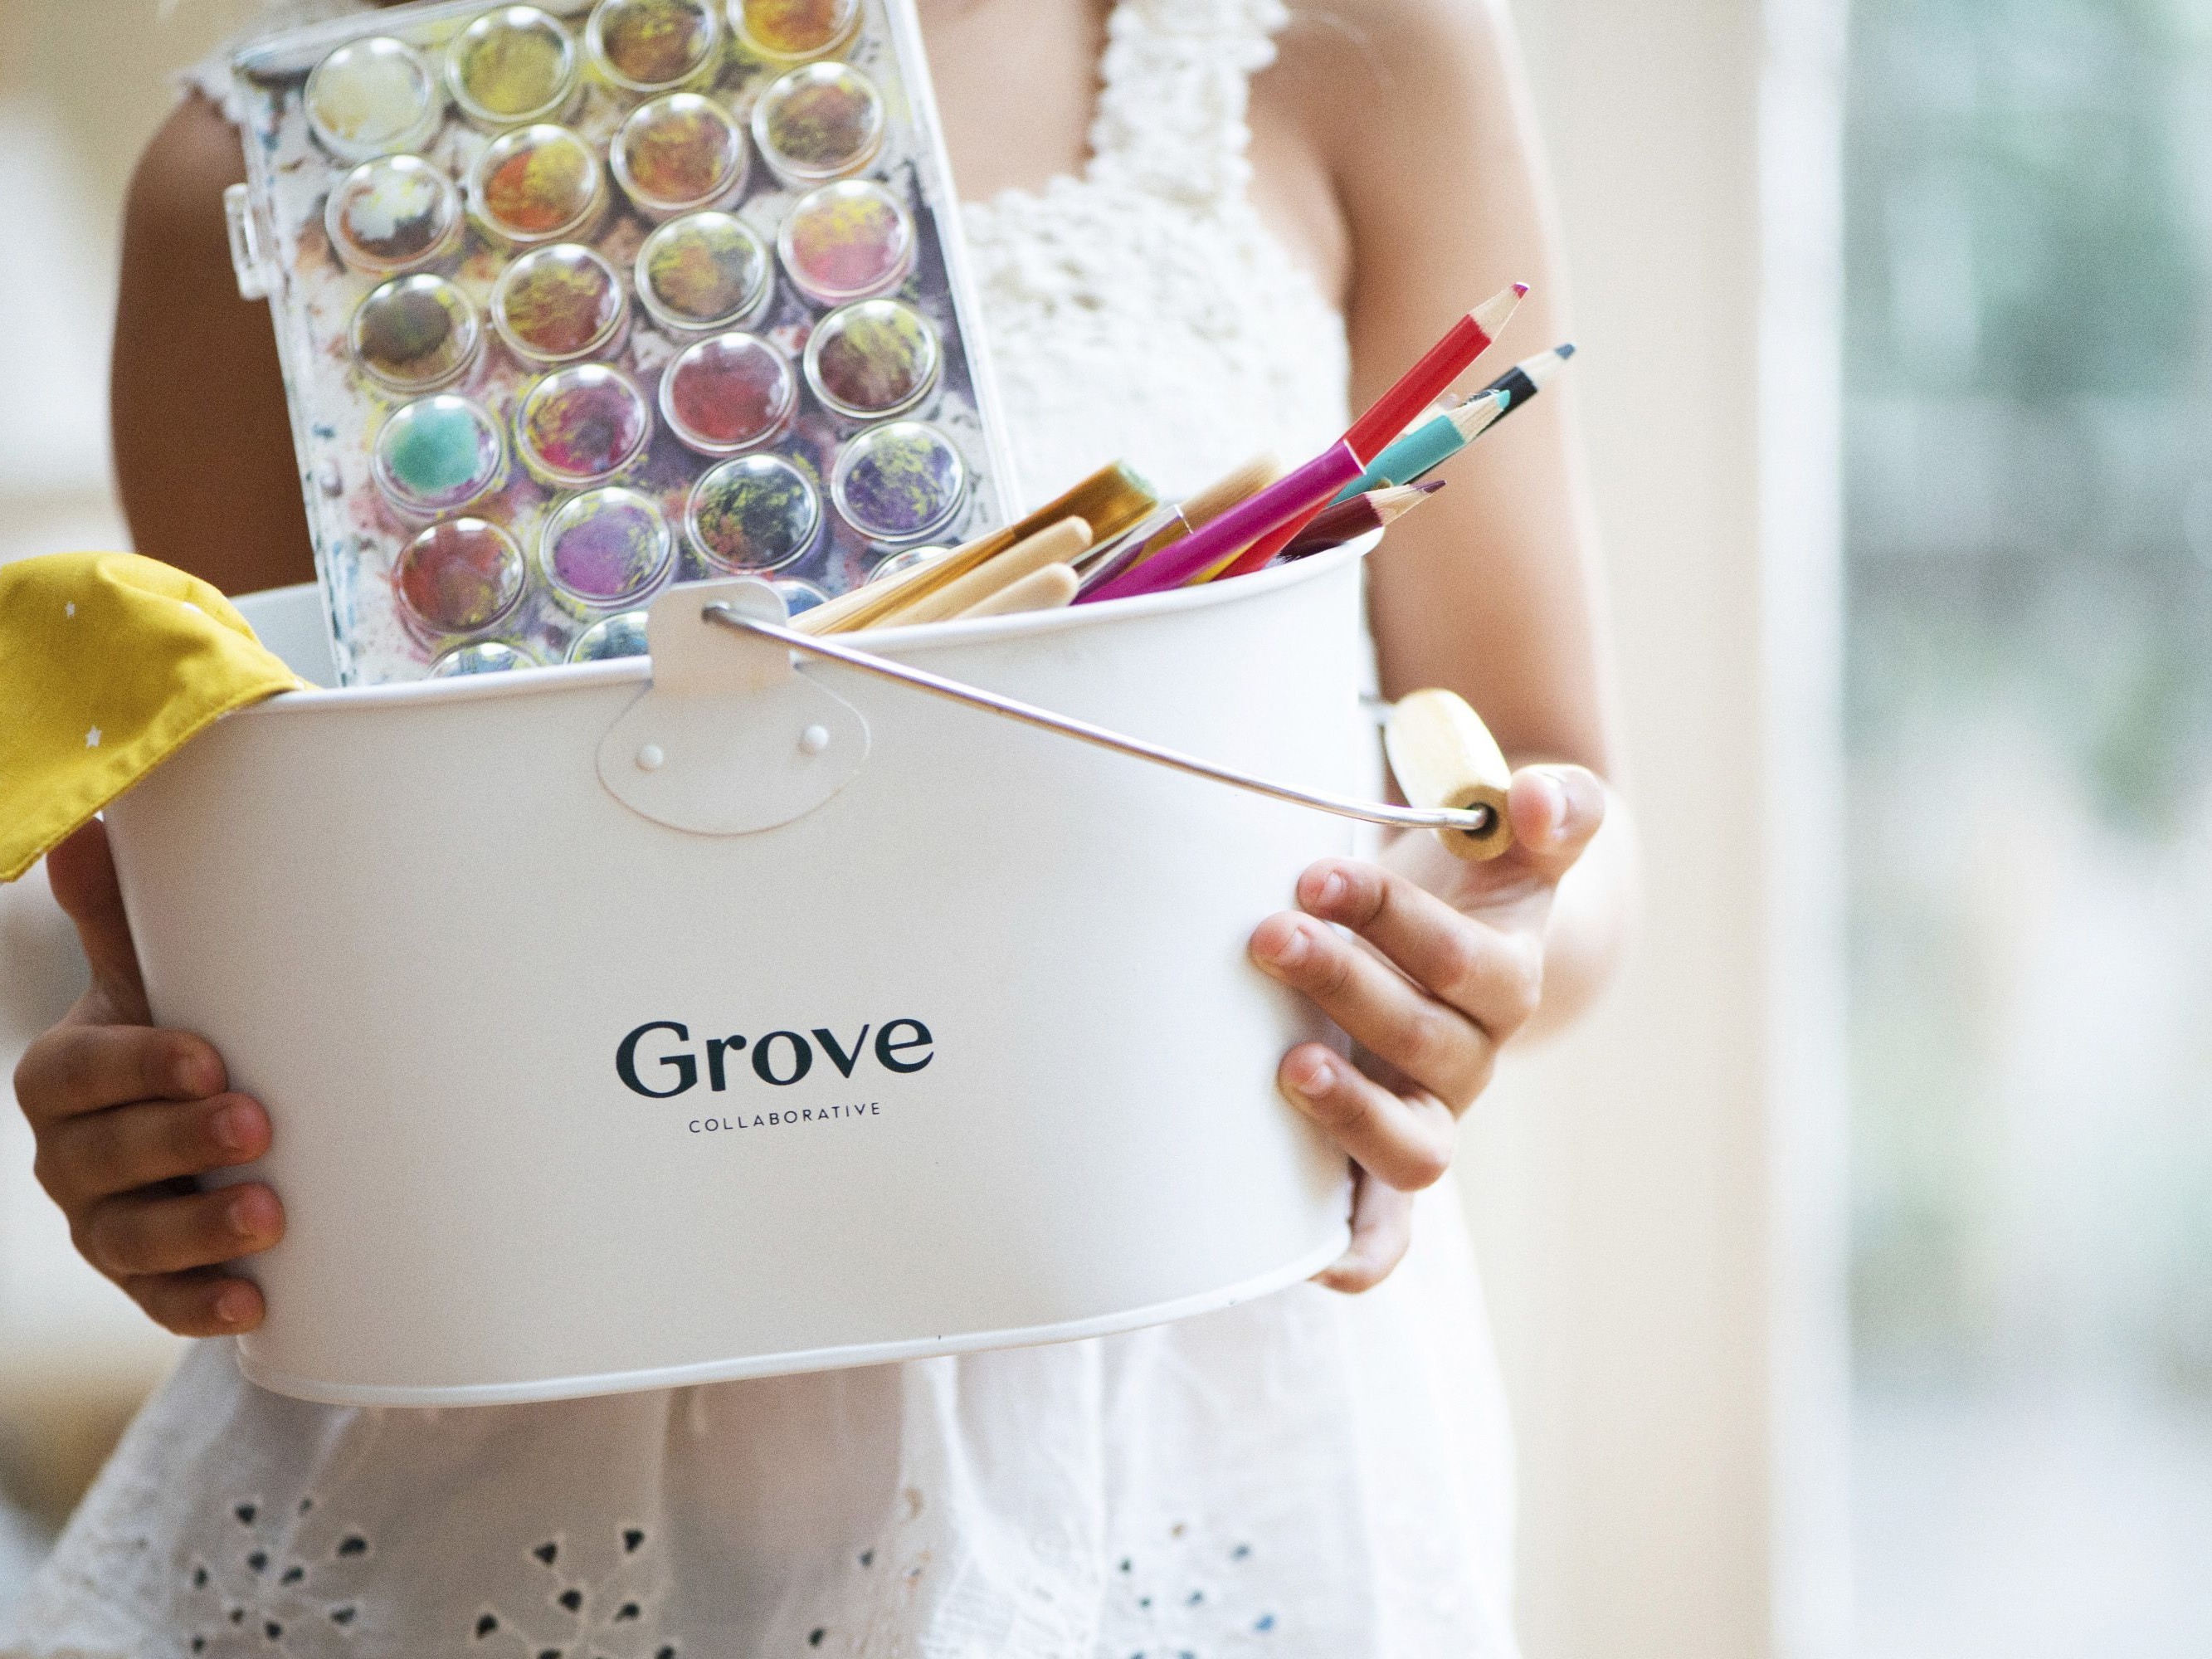 Image of someone holding a Grove caddy with art supplies.